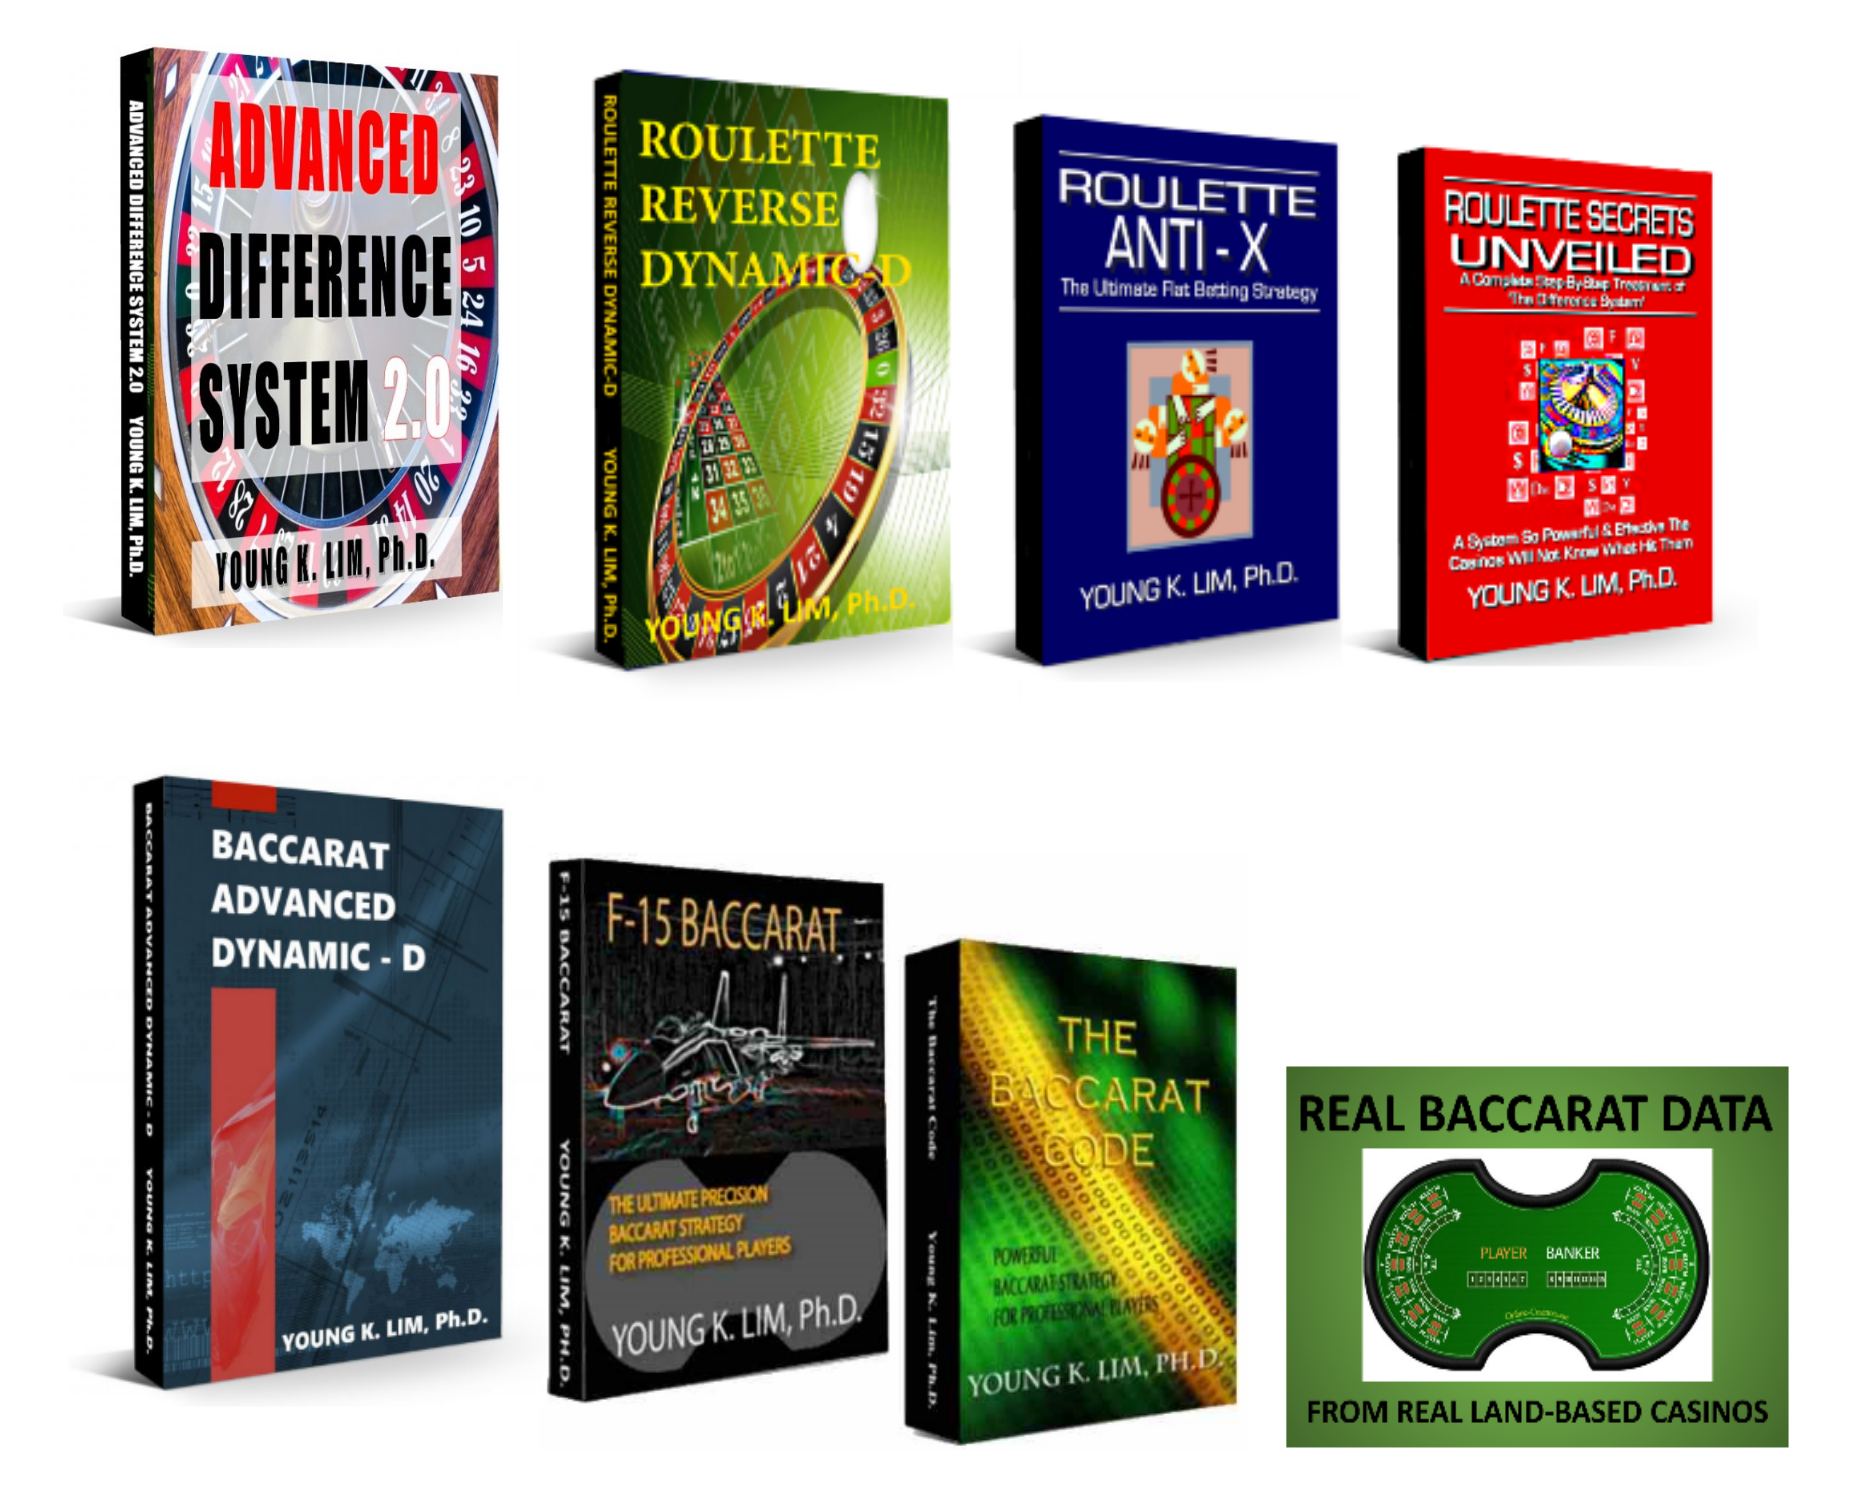 baccarat and roulette ebooks